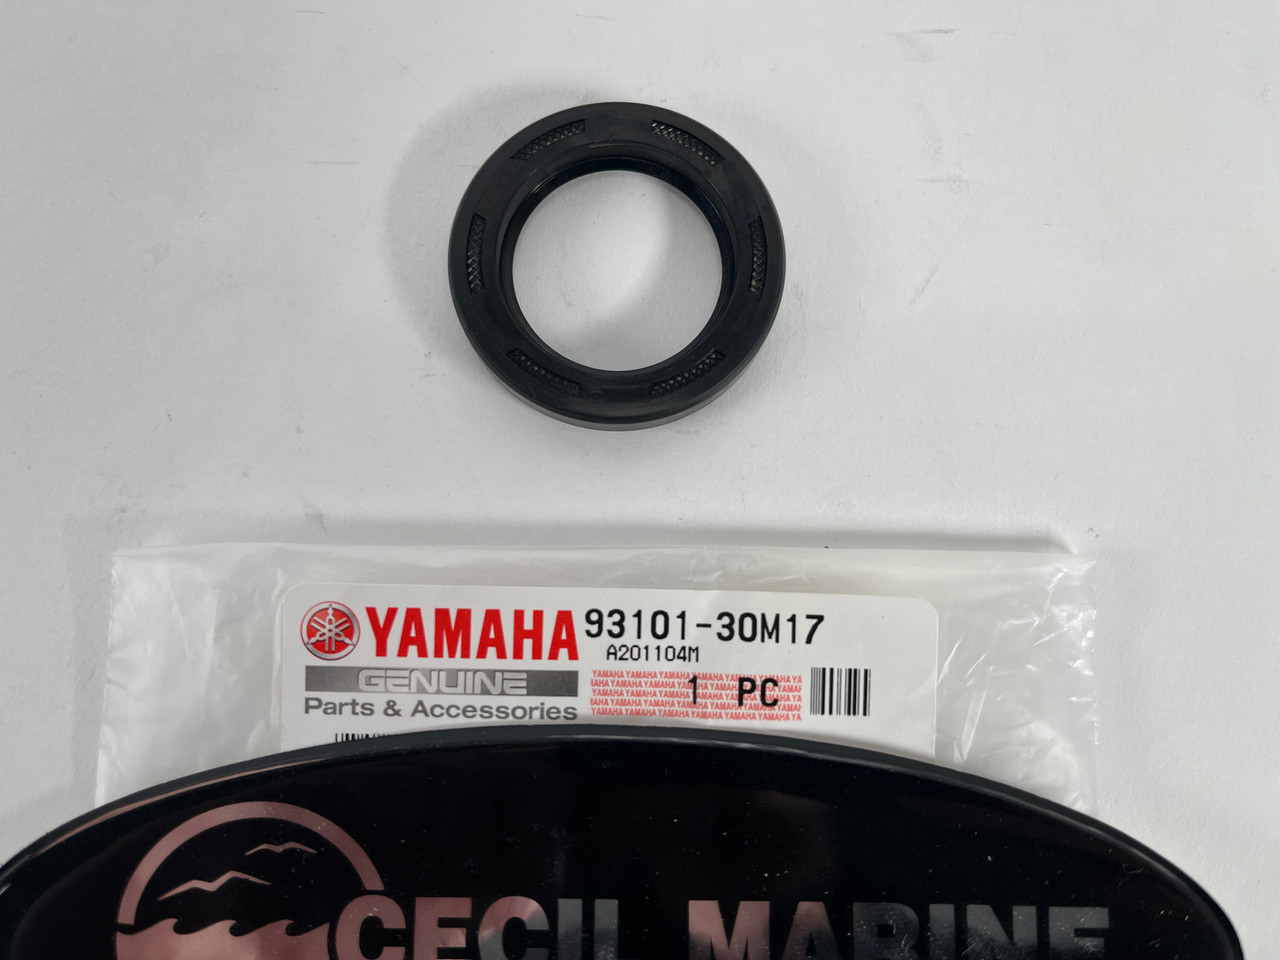 $12.99* GENUINE YAMAHA no tax* OIL SEAL,S-TYPE 93101-30M17-00 *In Stock & Ready To Ship